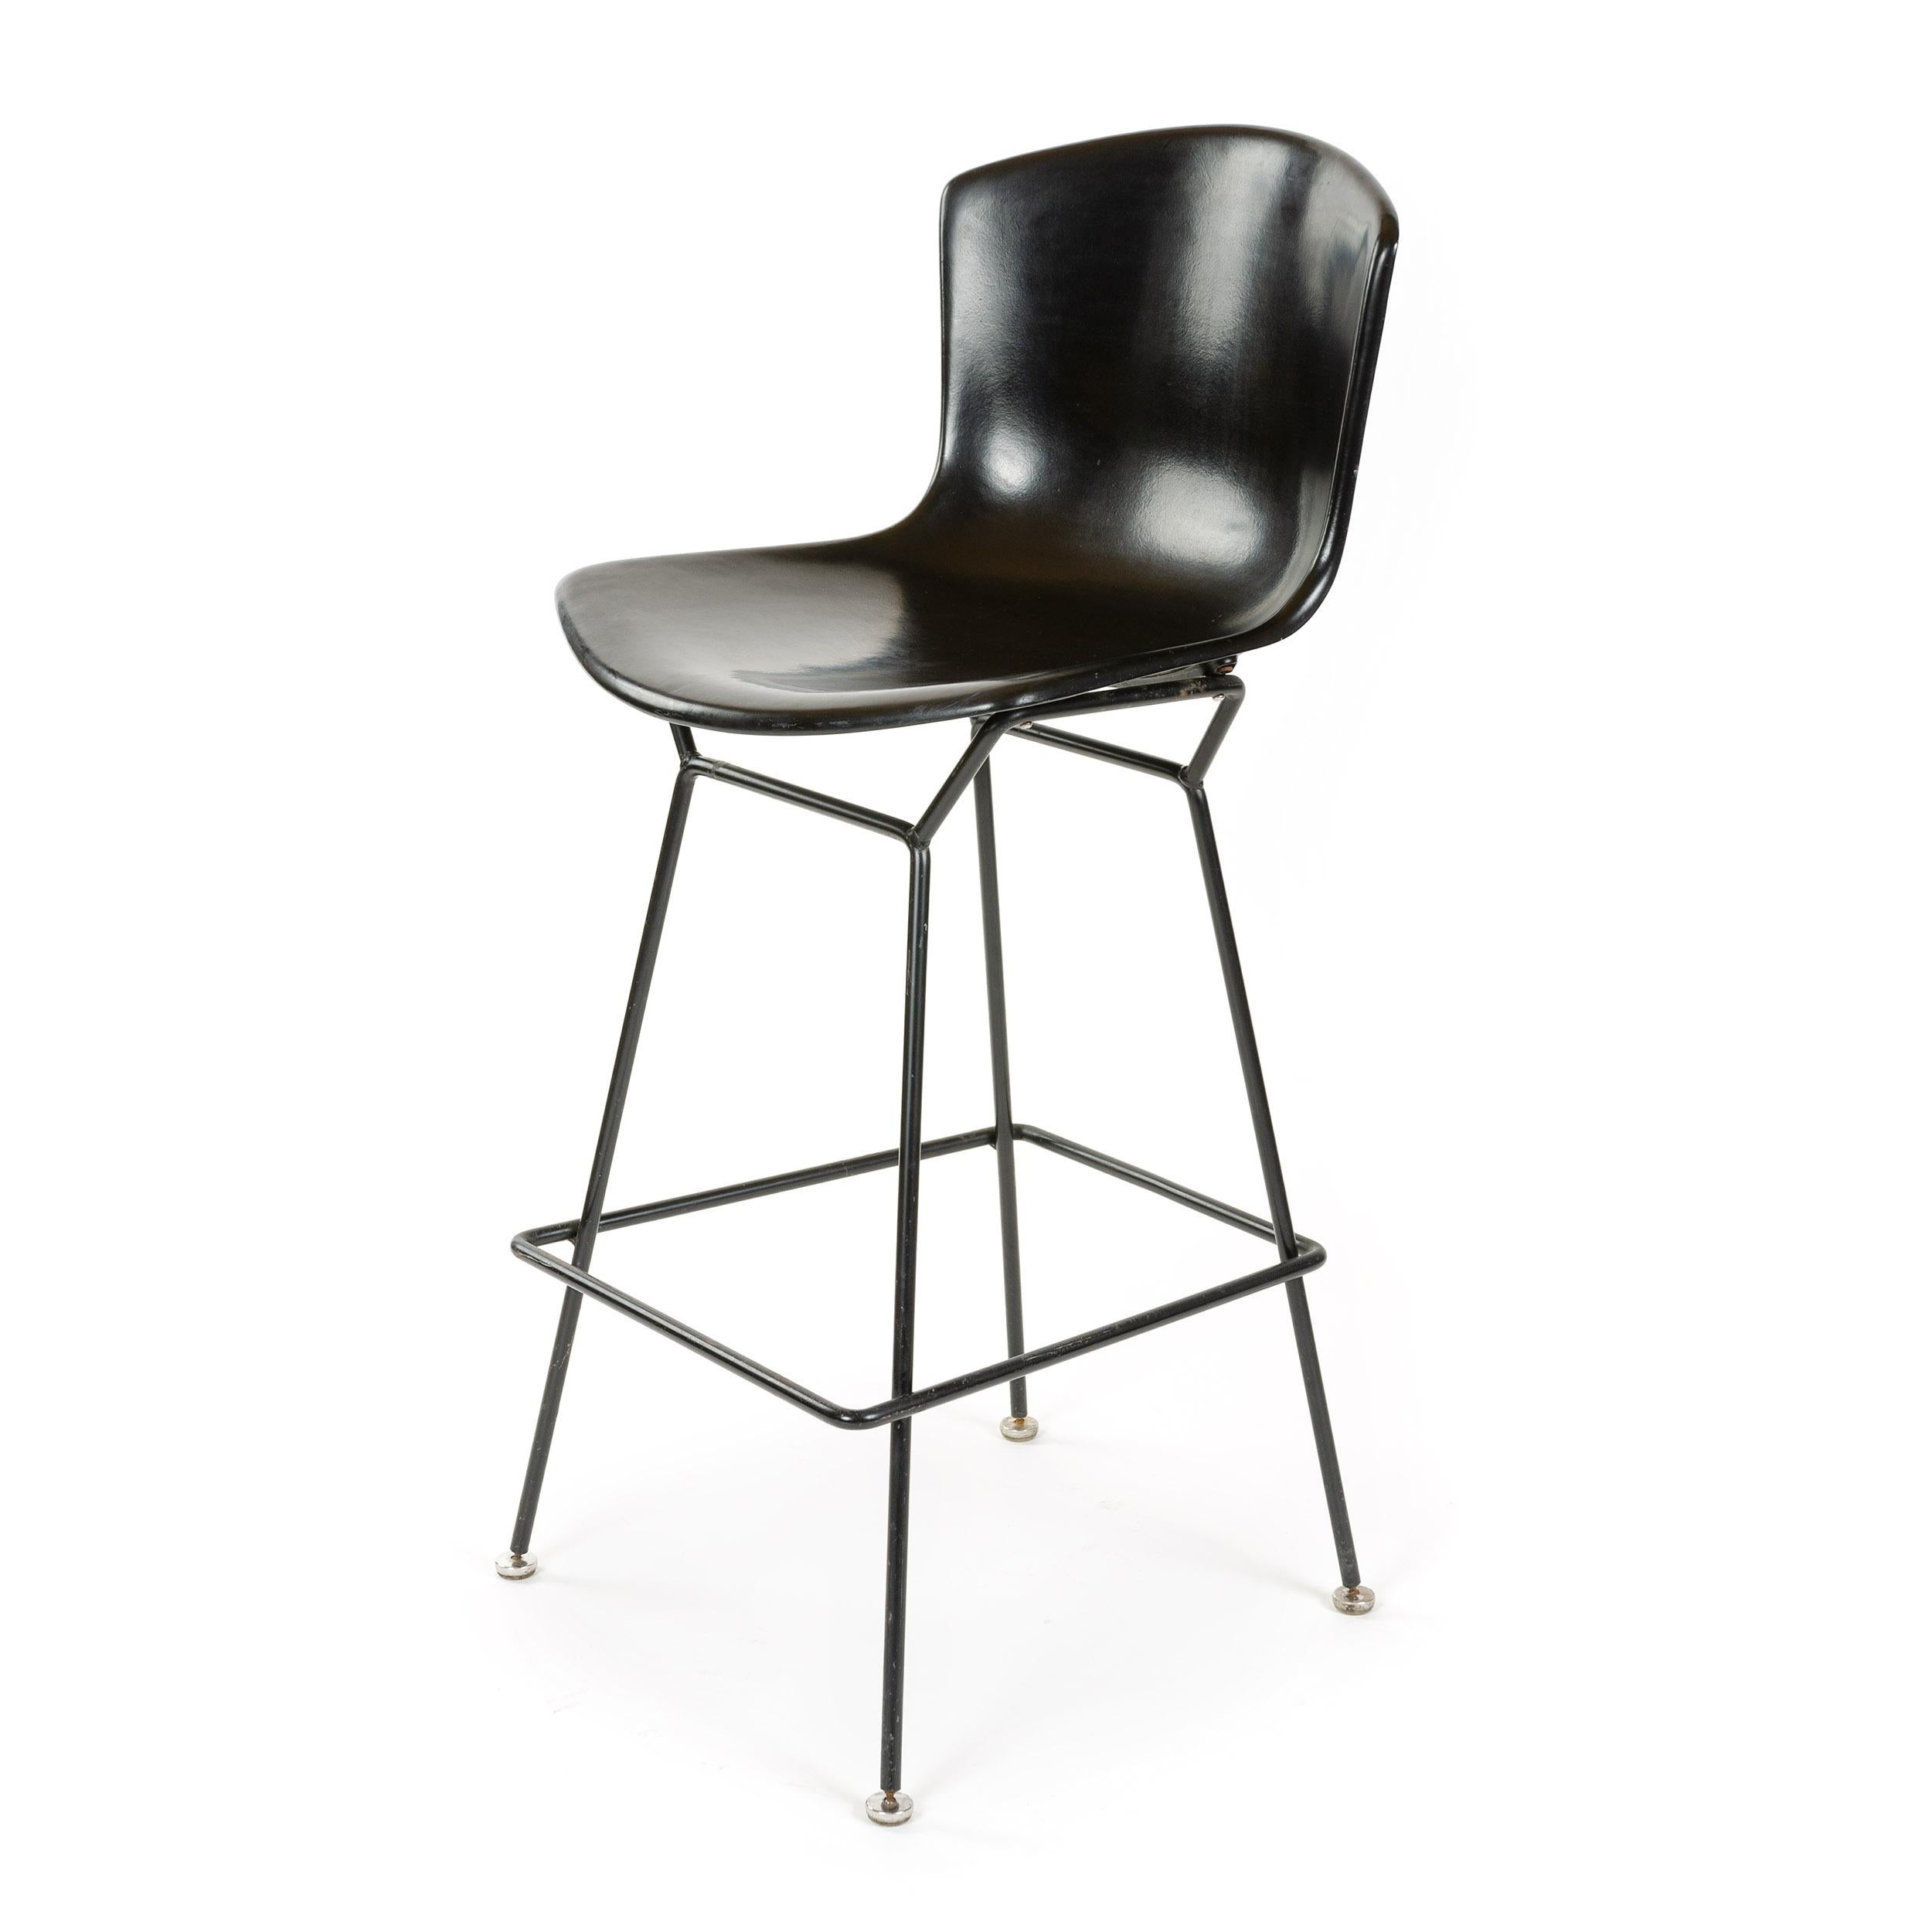 A barstool with a black fiberglass shell on splayed, painted legs.